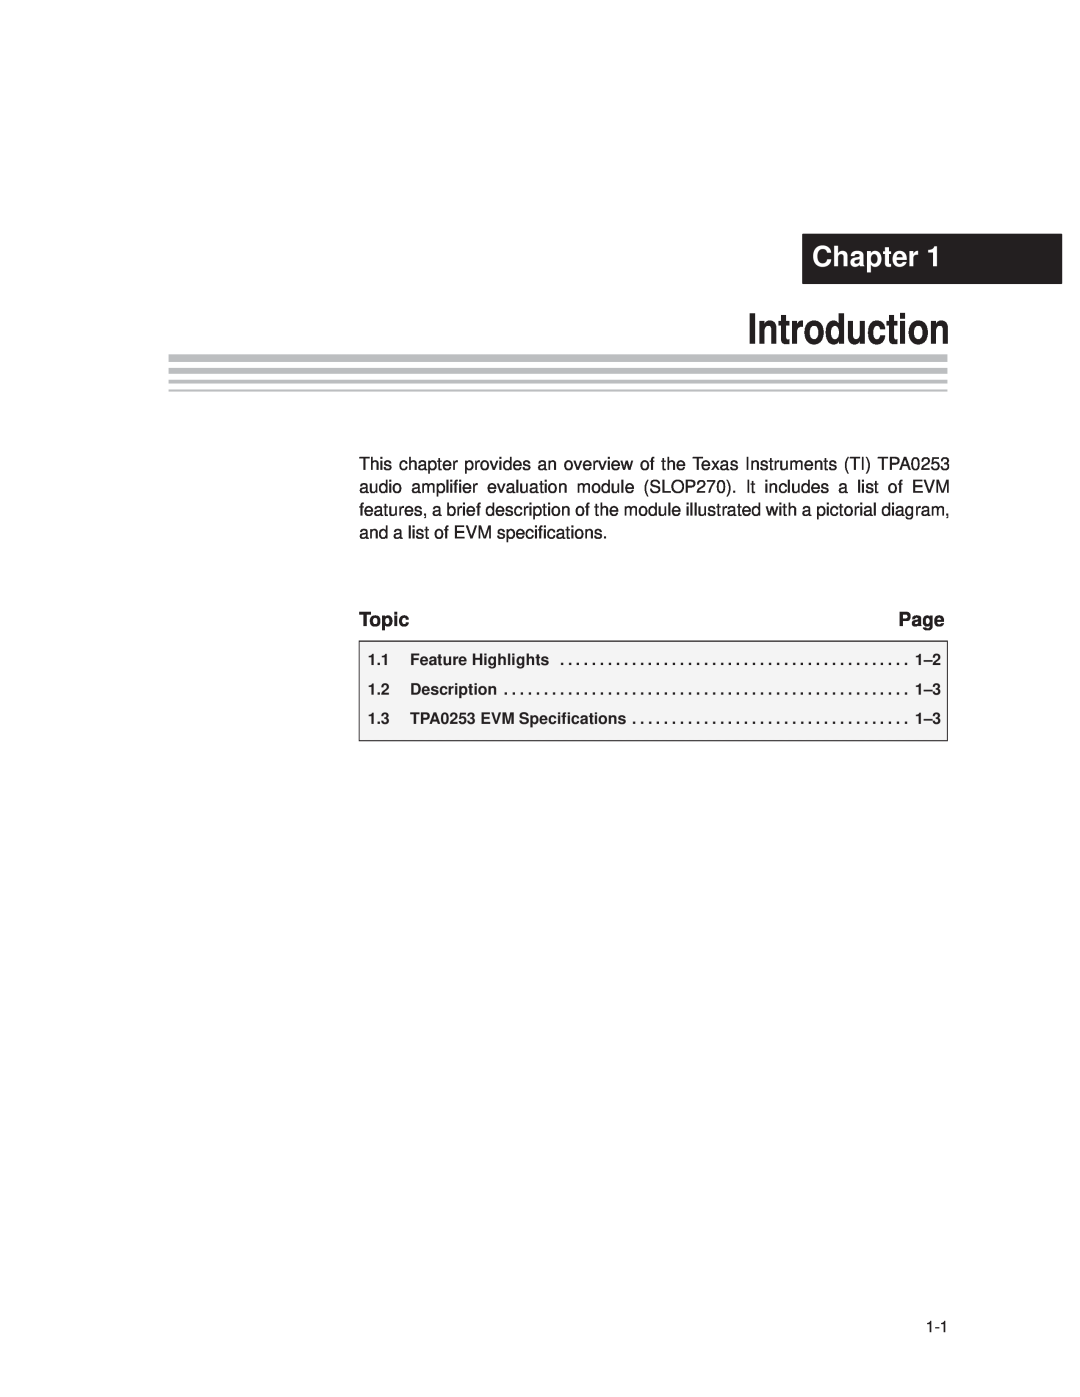 Texas Instruments TPA0253 manual Introduction, Chapter, Page, Topic 